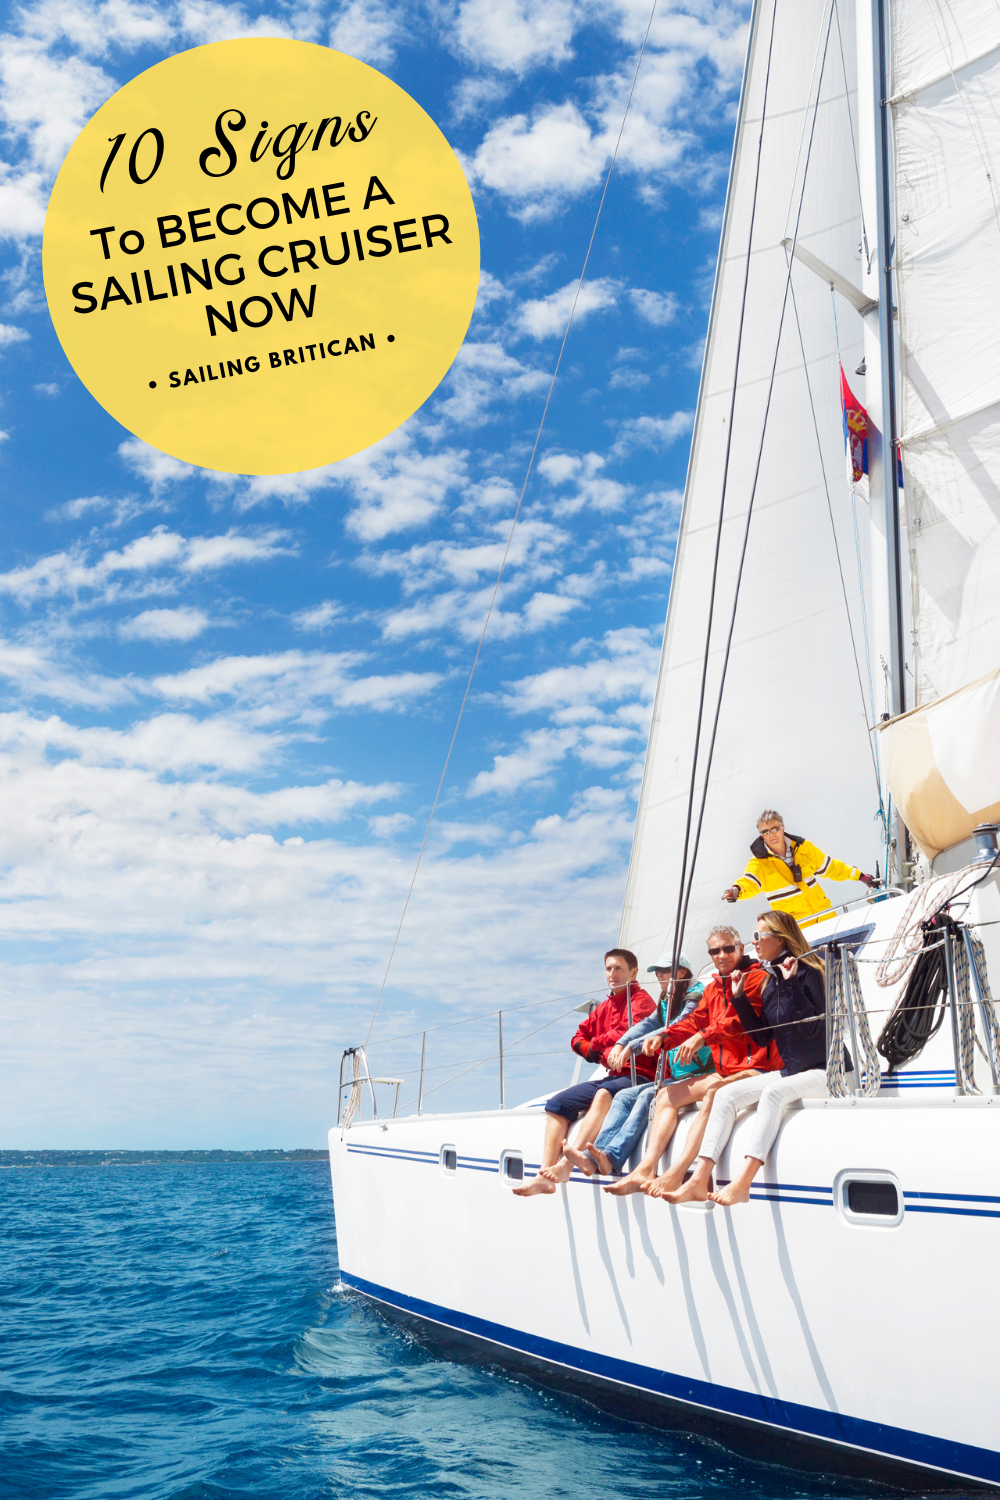 10 Signs To Become A Sailing Cruiser Now